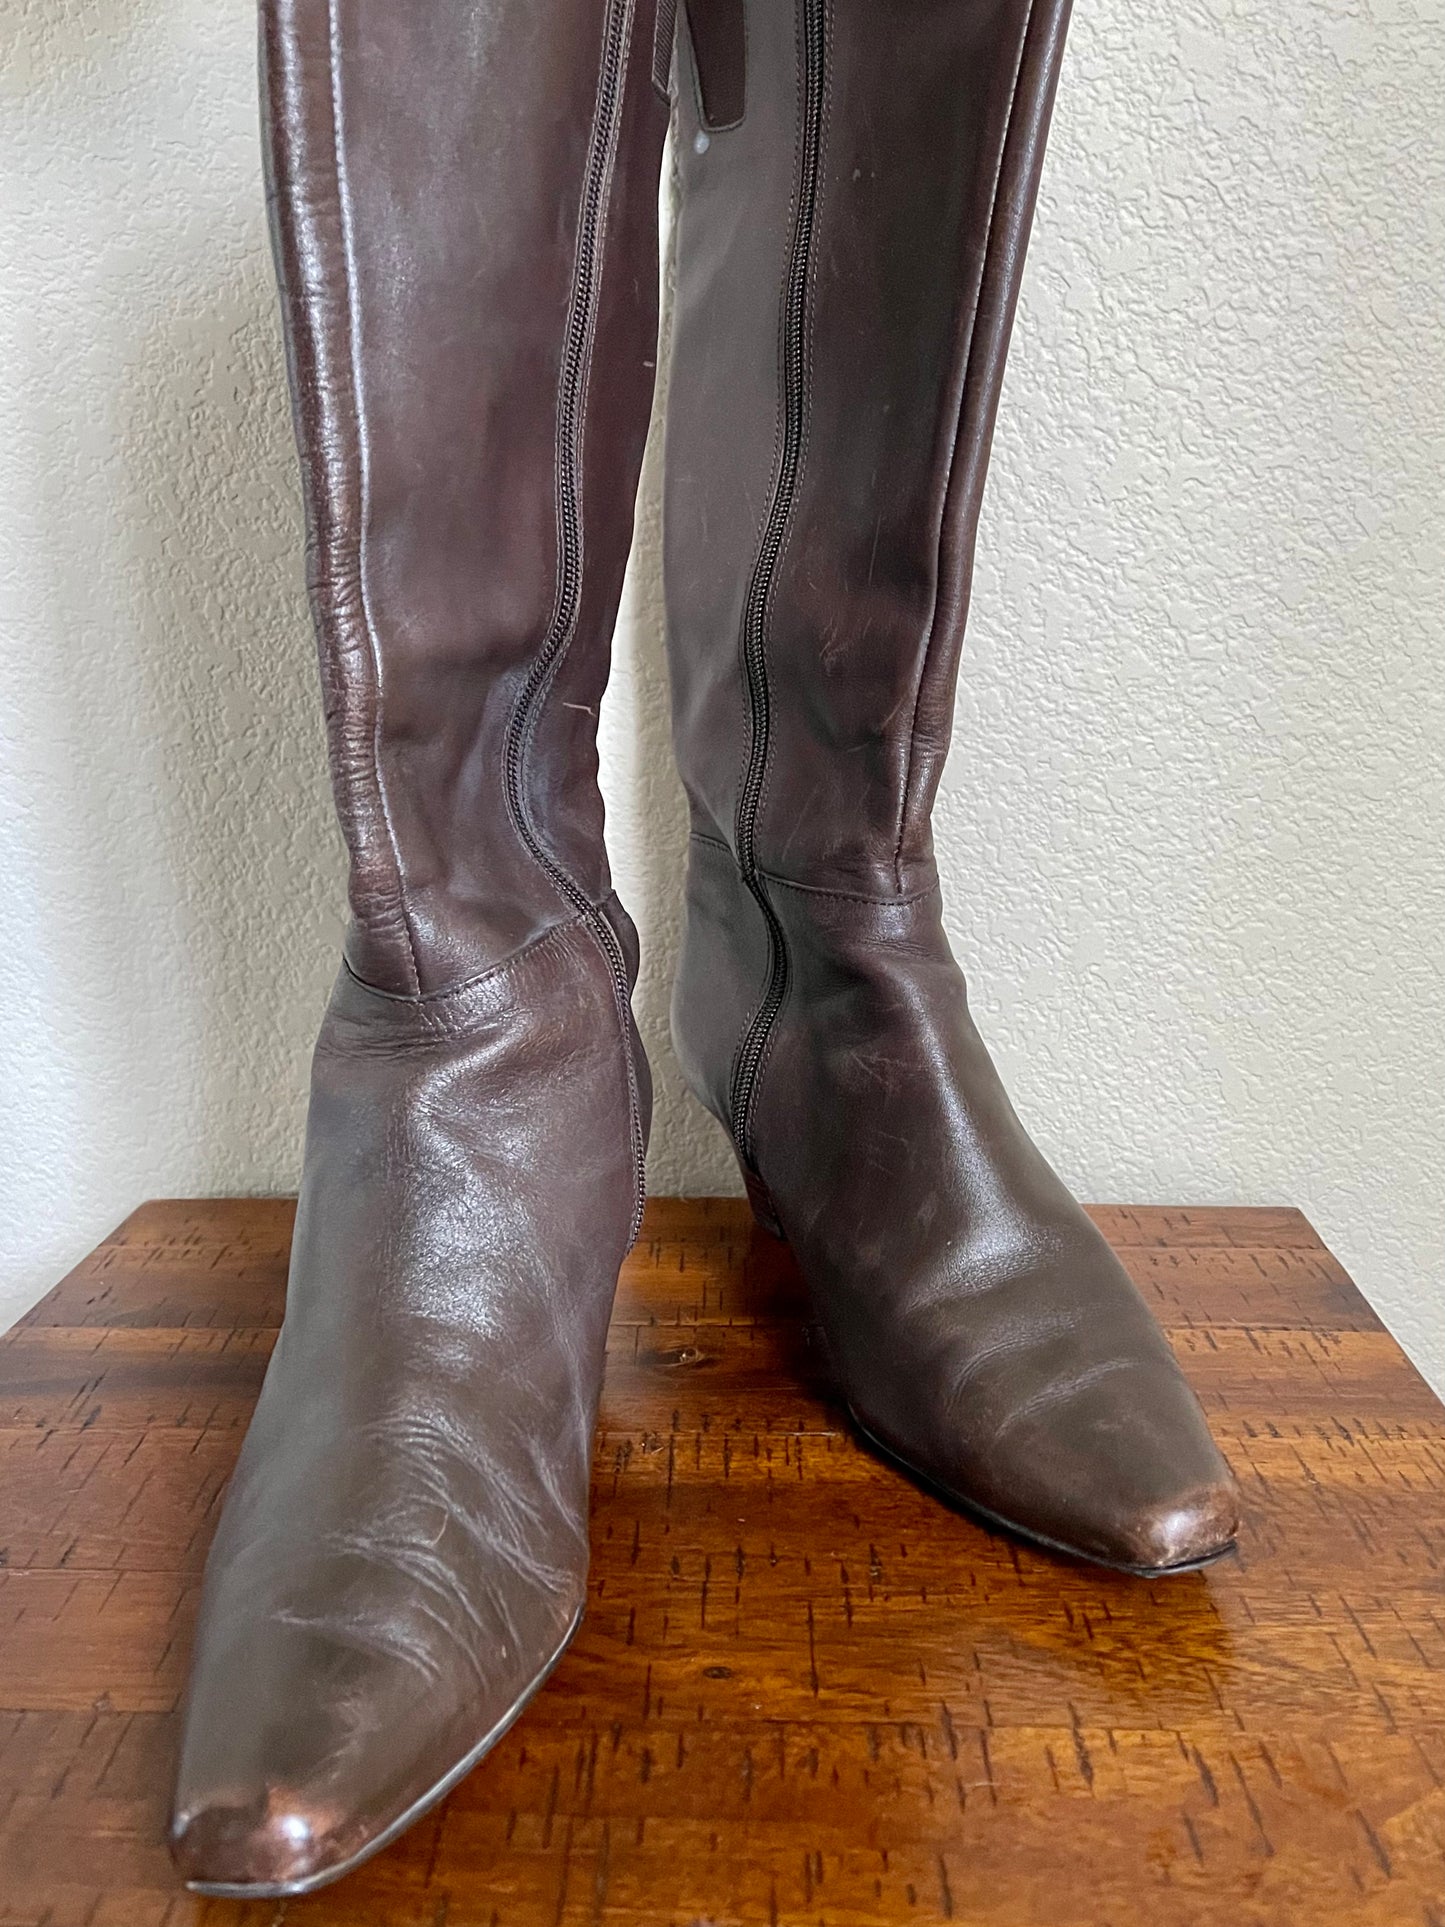 Knee High Brown Boots (8.5”)